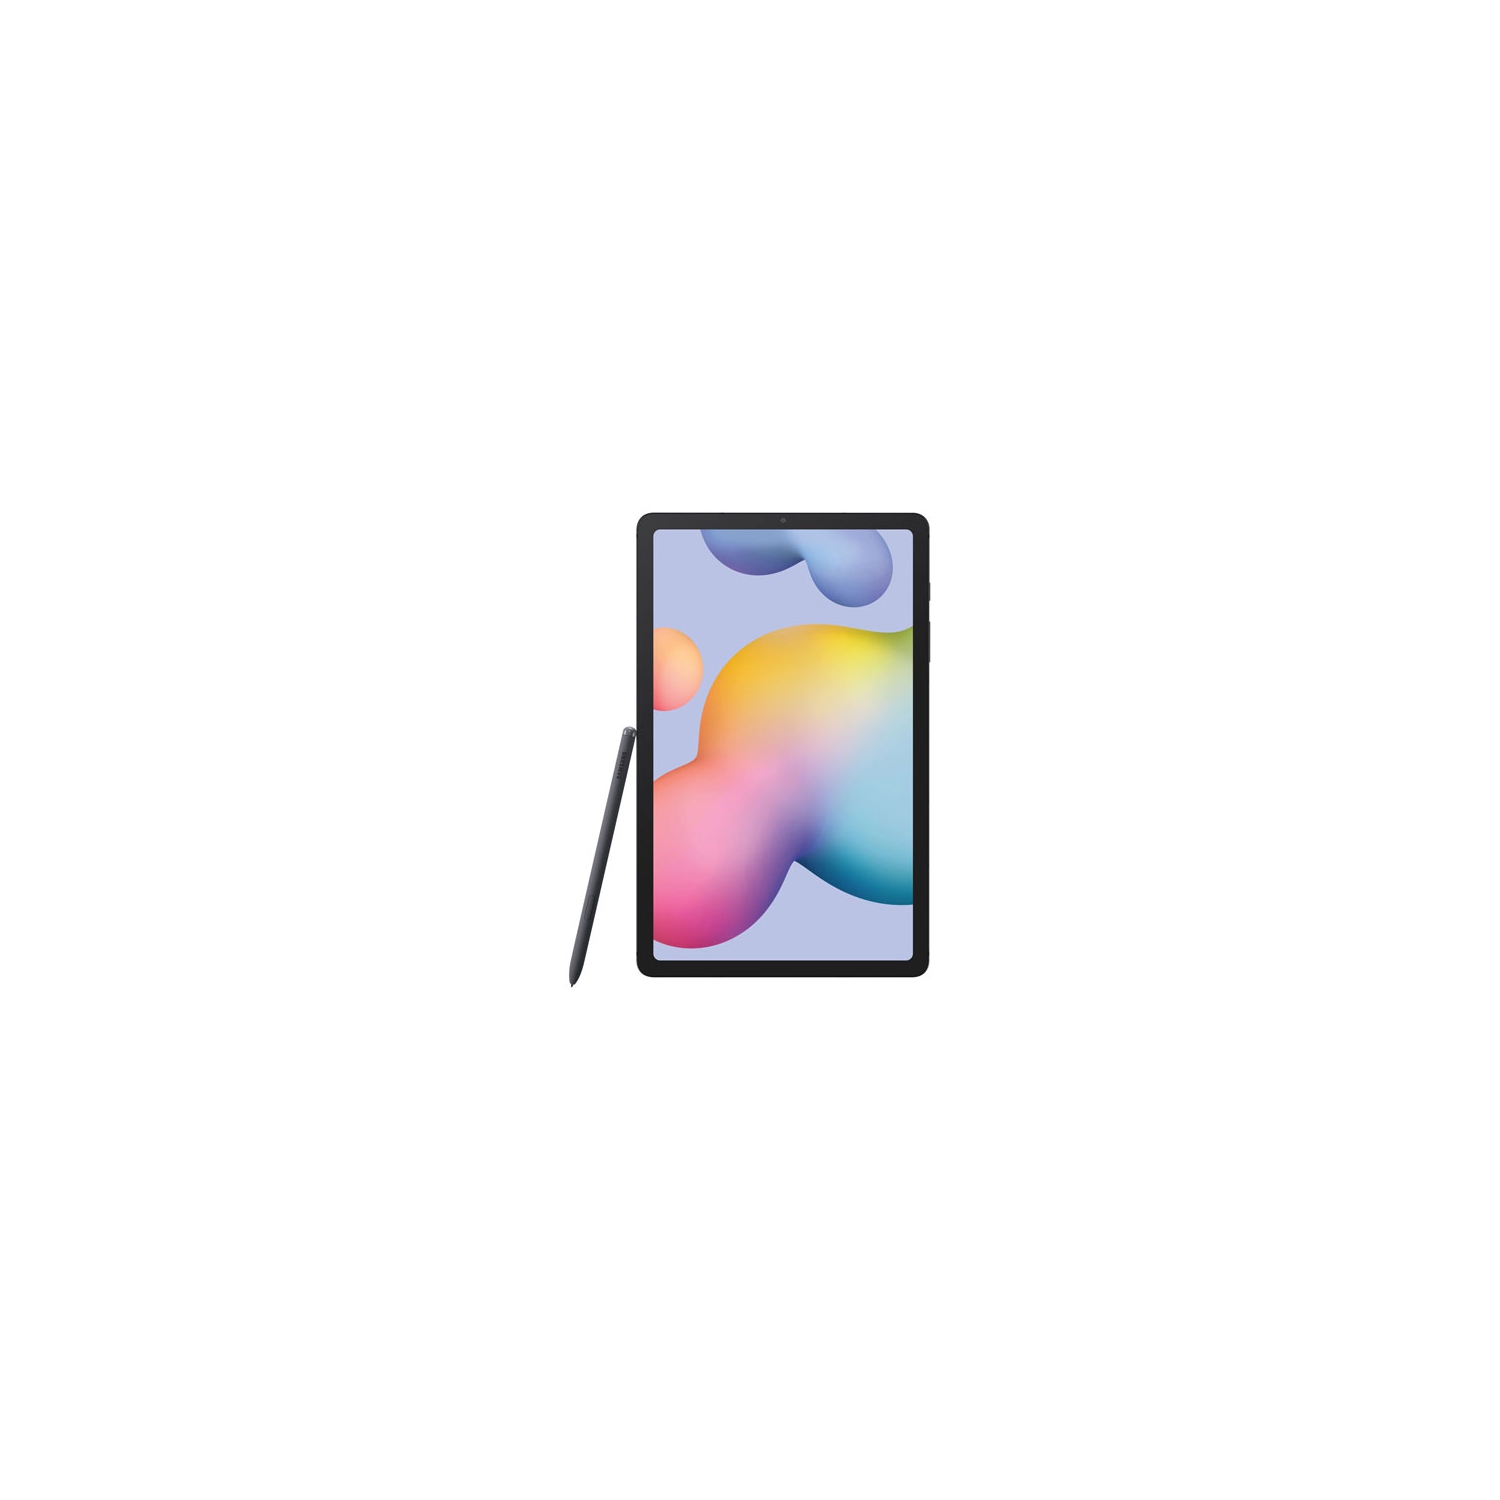 Refurbished (Good) - Samsung Galaxy Tab S6 Lite 10.4" 128GB Android 12 Tablet with Snapdragon 720G 8-Core Processor - Grey